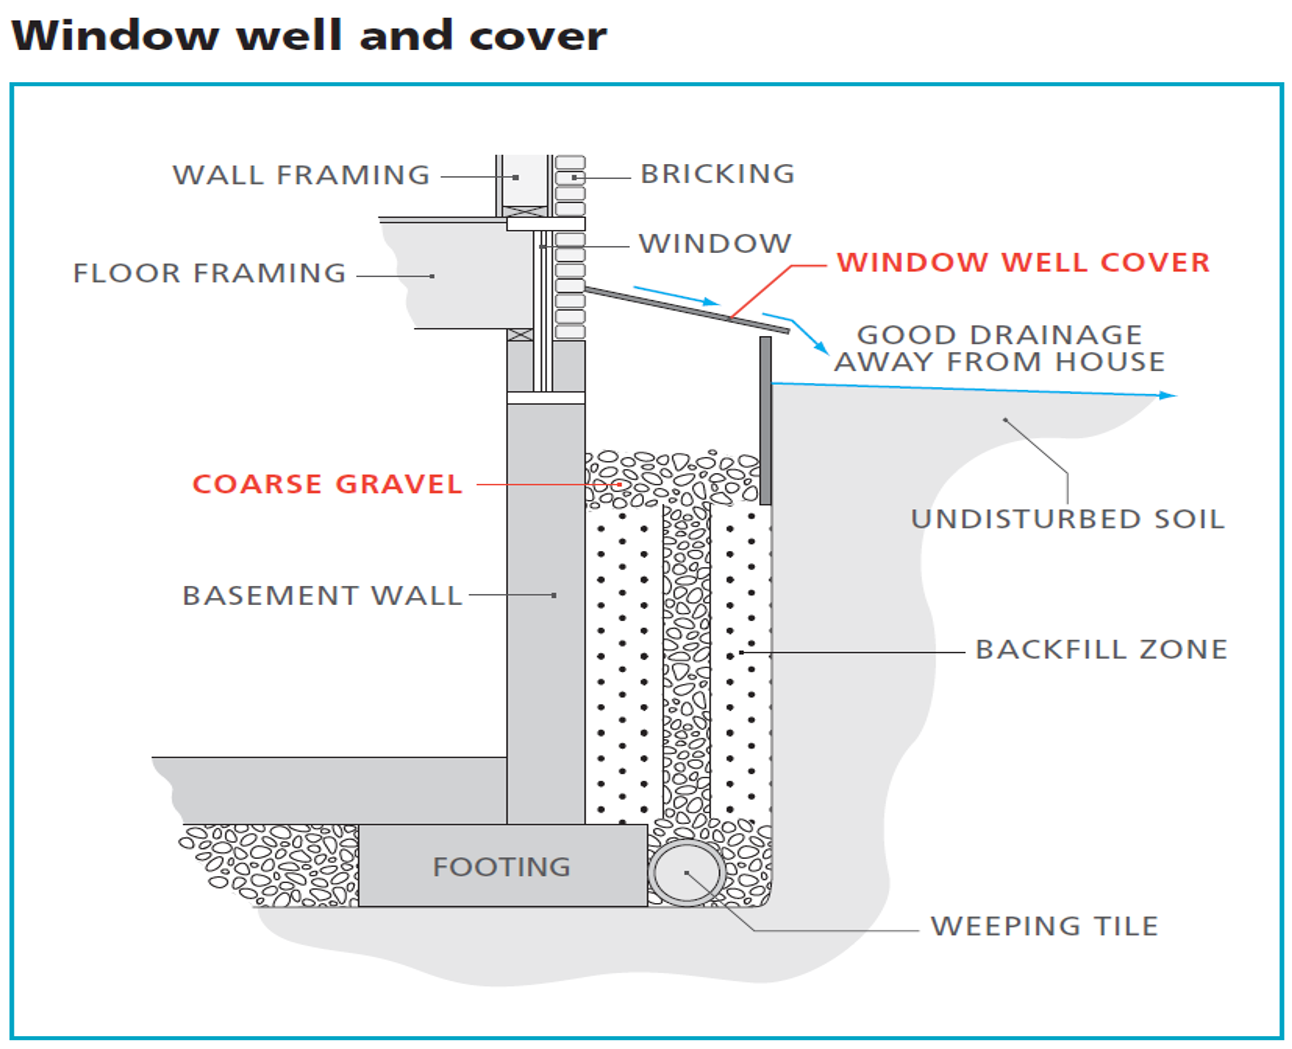 A schematic showing the installation of a window well and cover.  